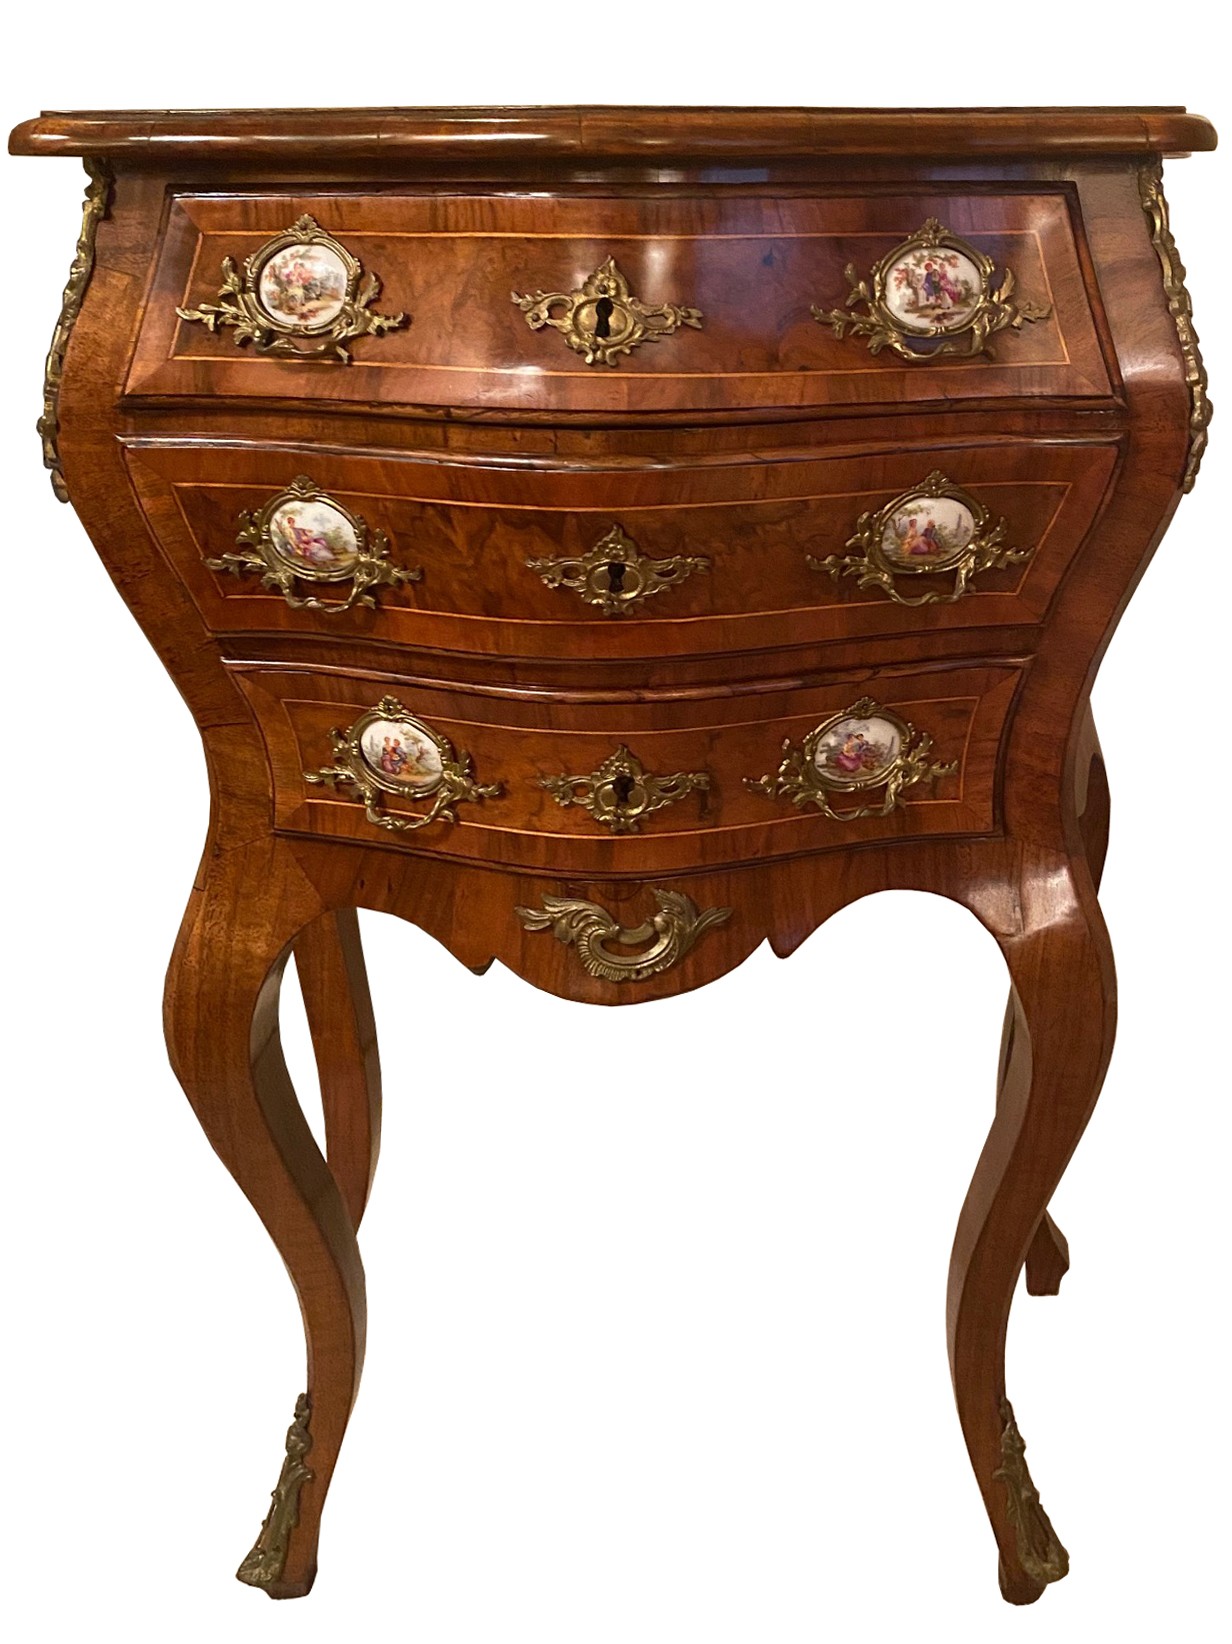 19th C. Austrian Walnut Bombay Chest with Gilt Bronze Armalo Details and Hand Porcelain Scenes